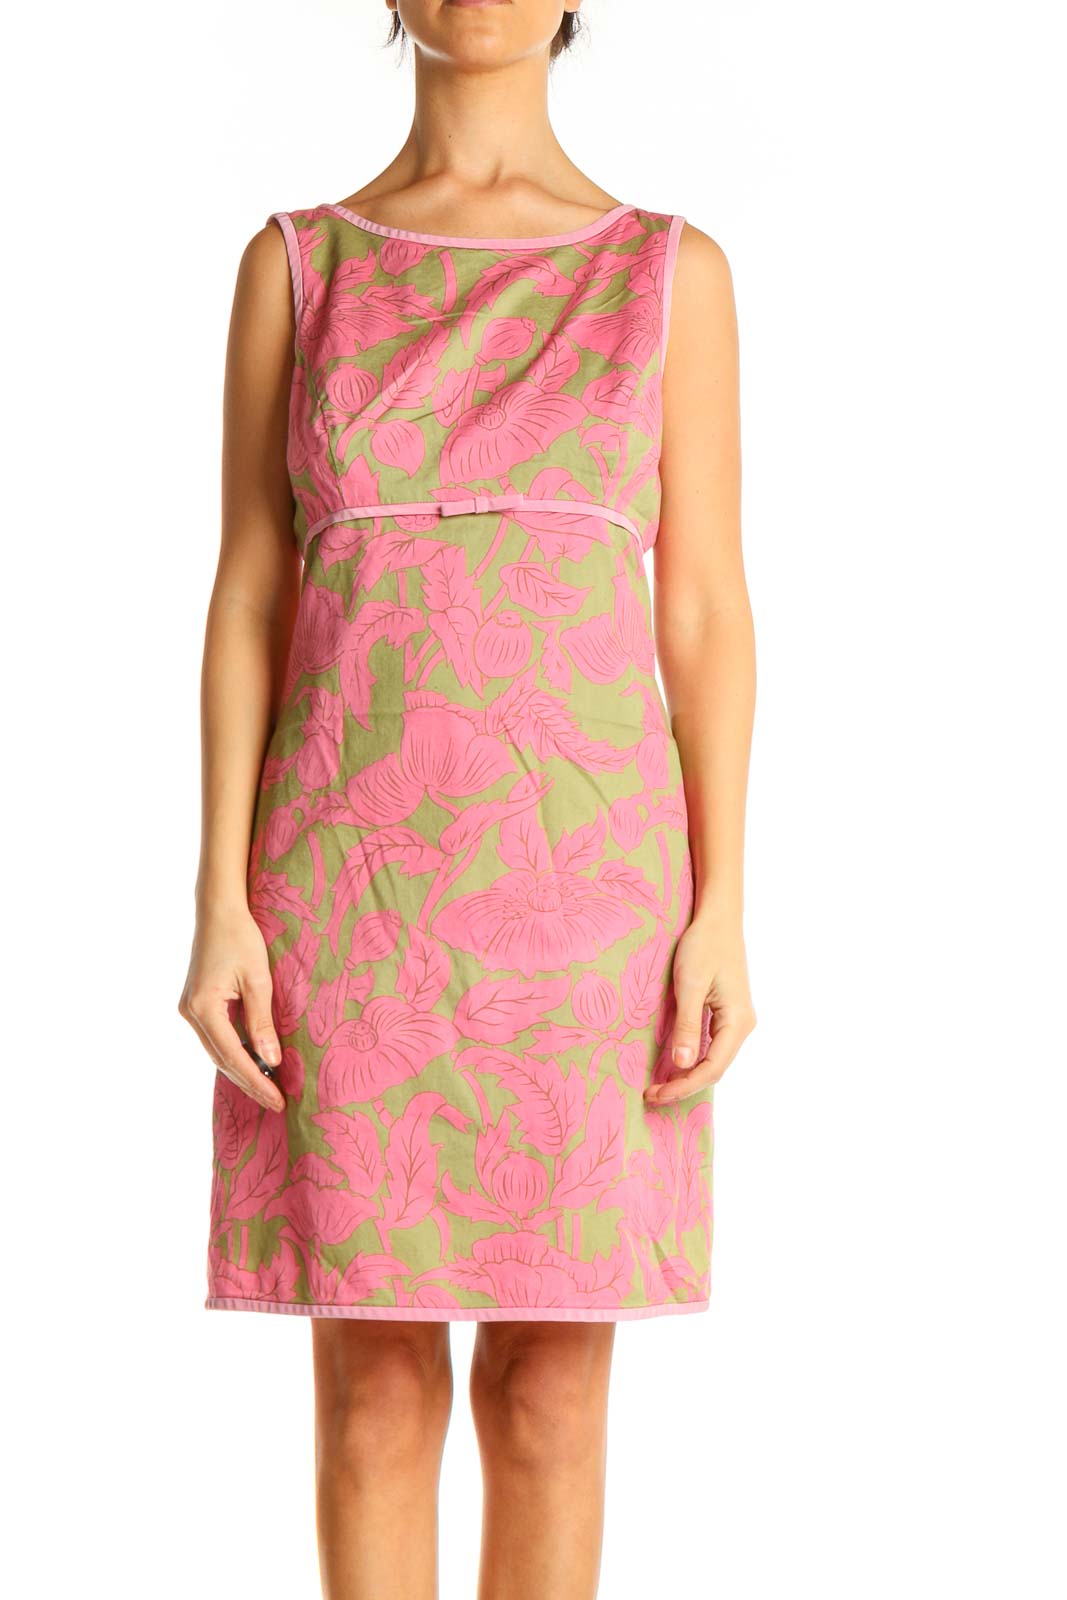 Pink Floral Print Classic Sheath Dress Front